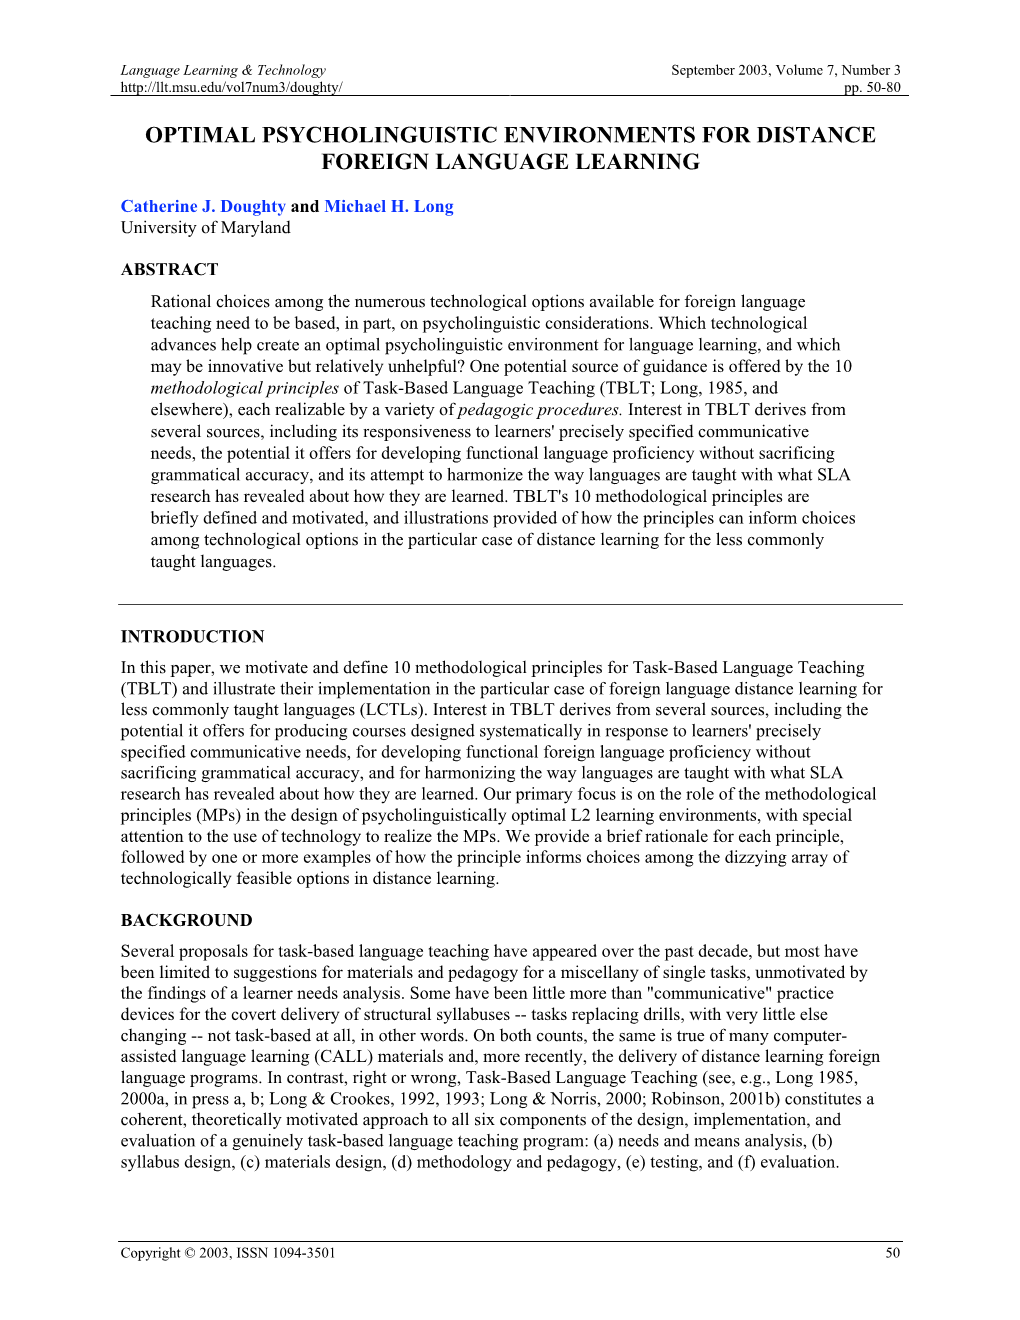 Optimal Psycholinguistic Environments for Distance Foreign Language Learning